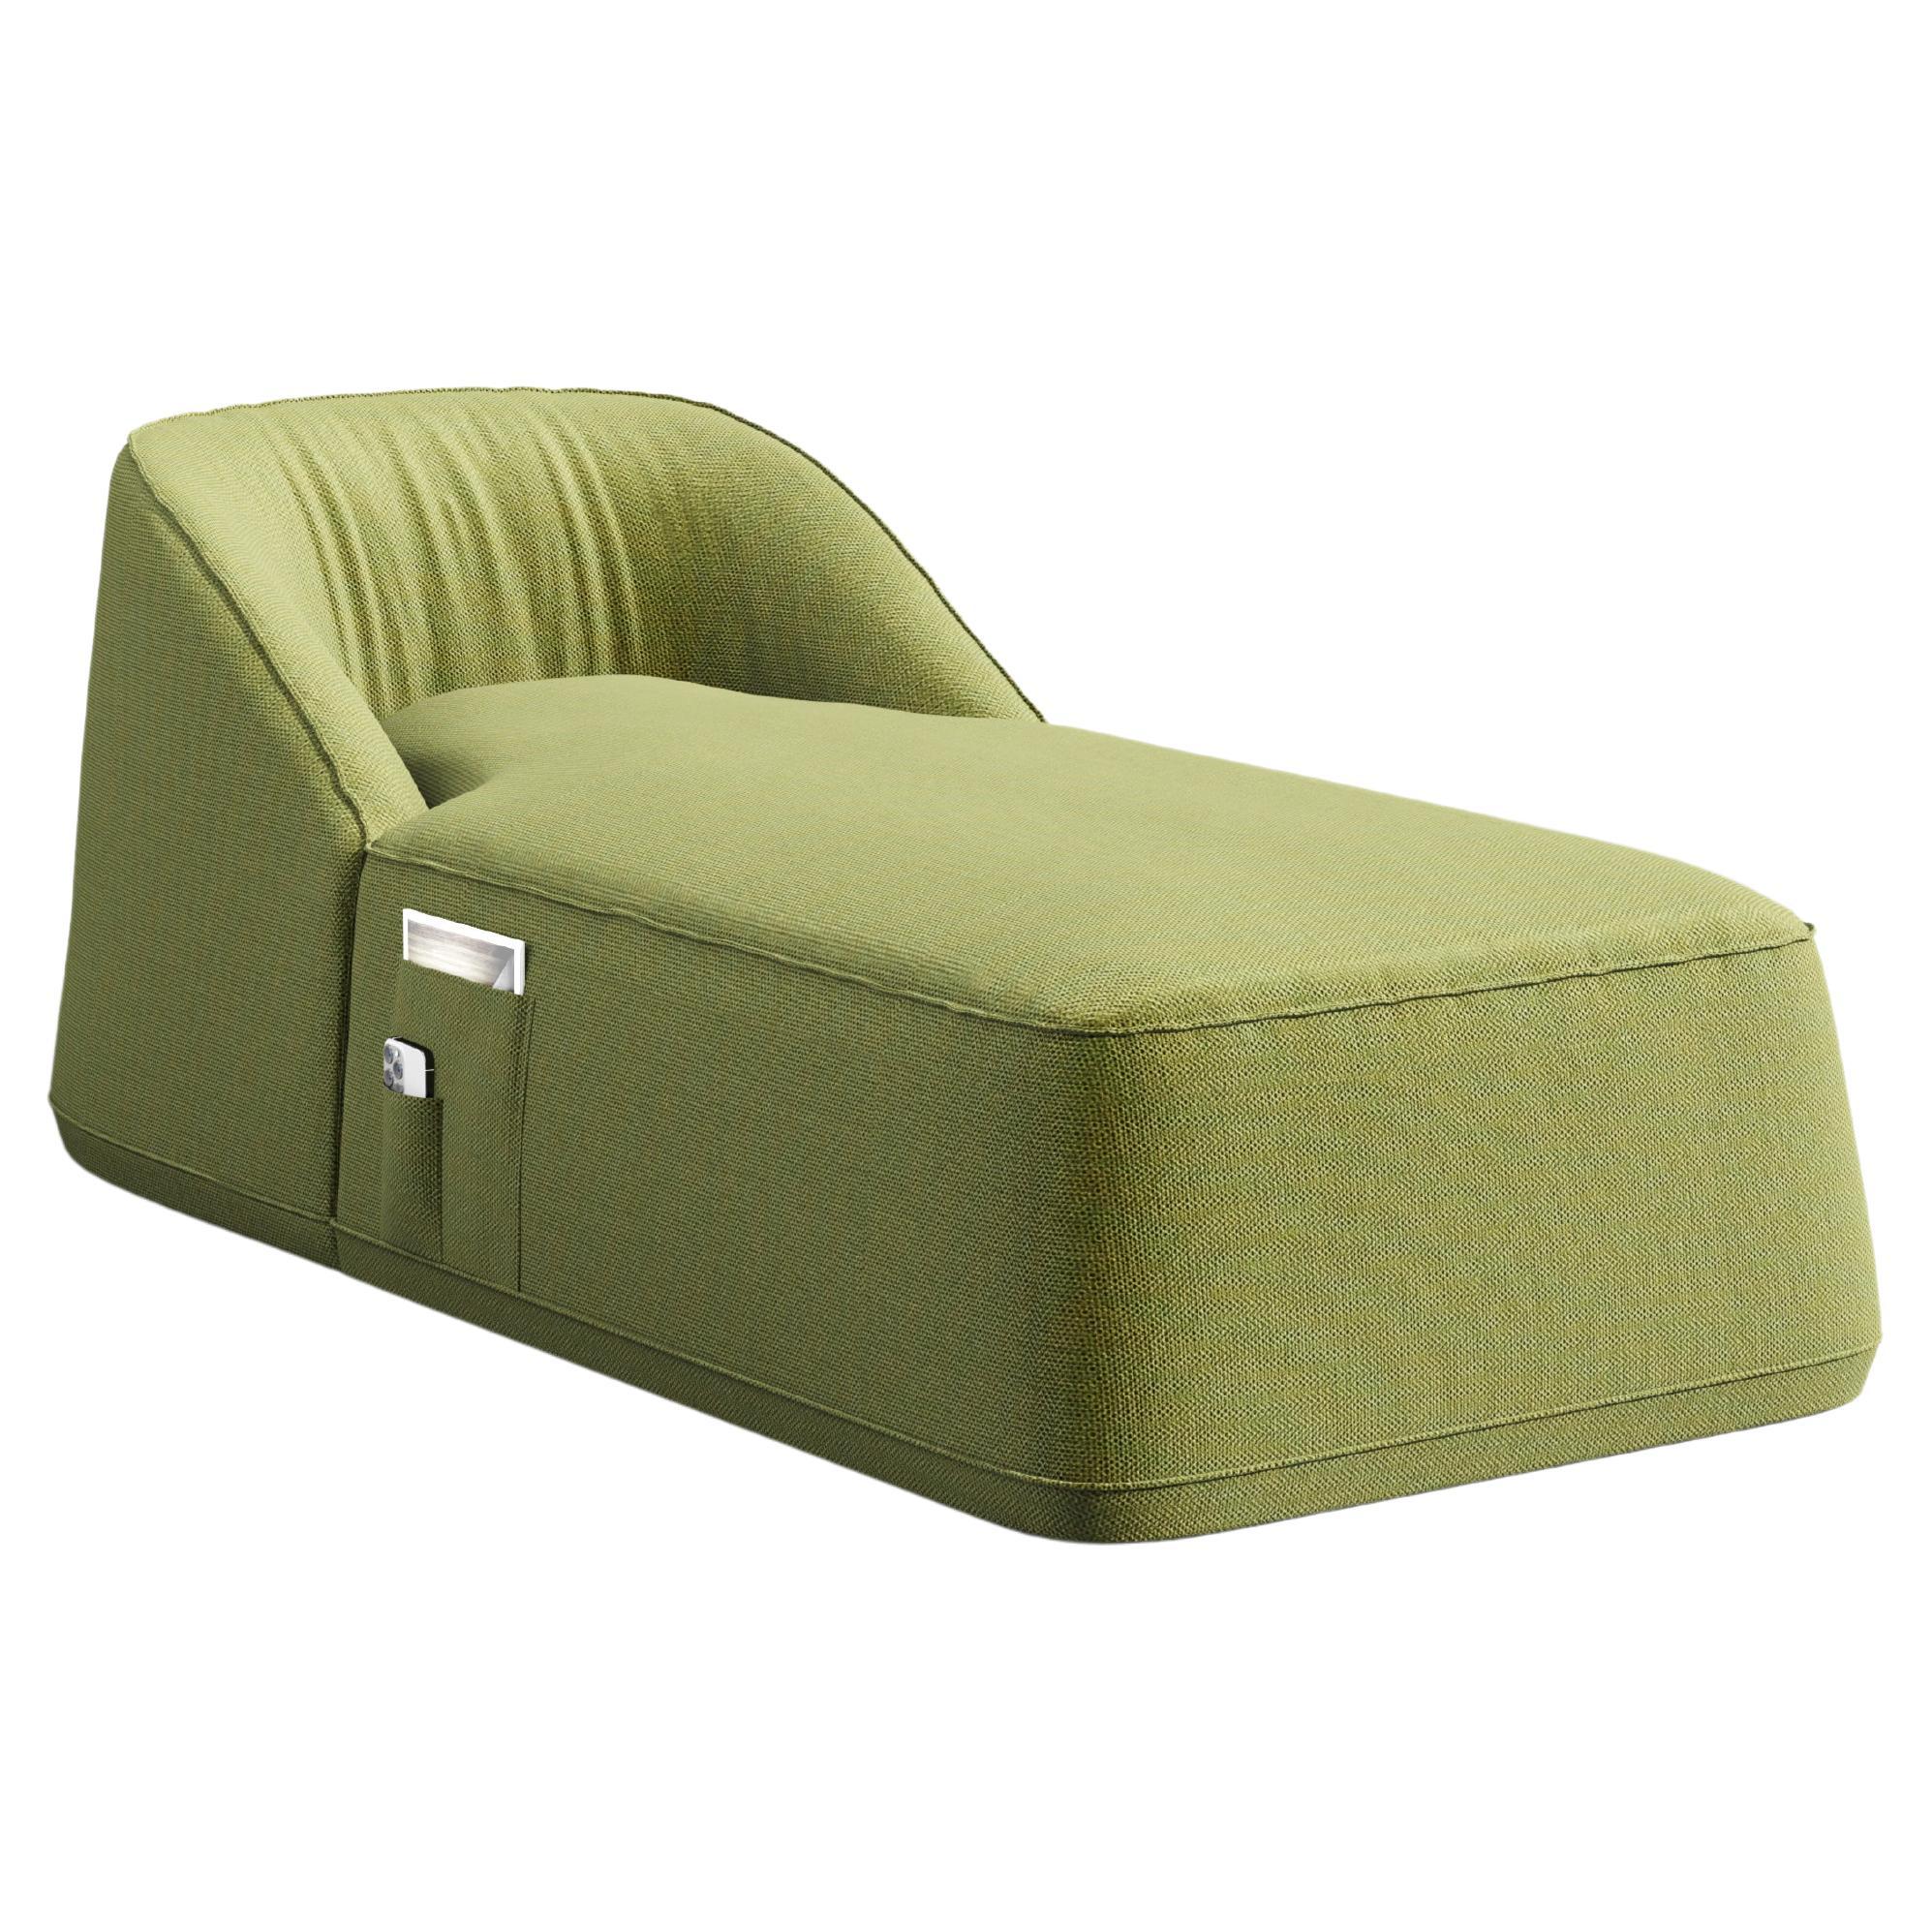 Modern Outdoor Sunbed Weather-Resistant Sunbrella Fabric Upholstery in Green For Sale